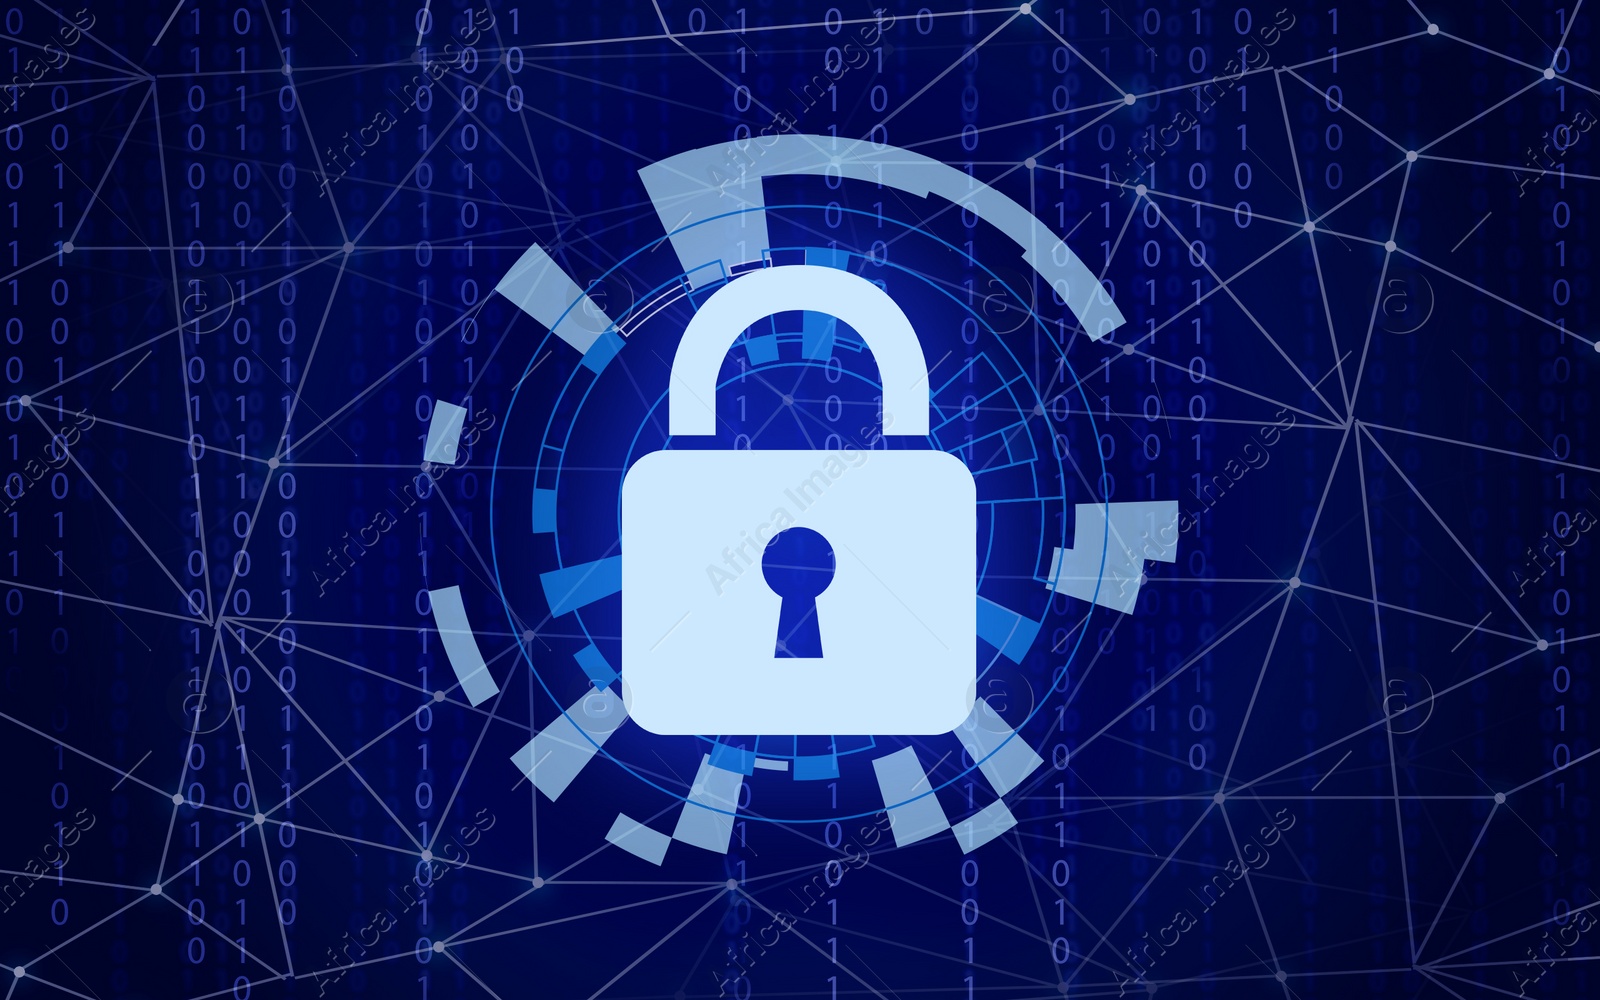 Illustration of Padlock illustration as symbol of cyber security on blue background with binary code